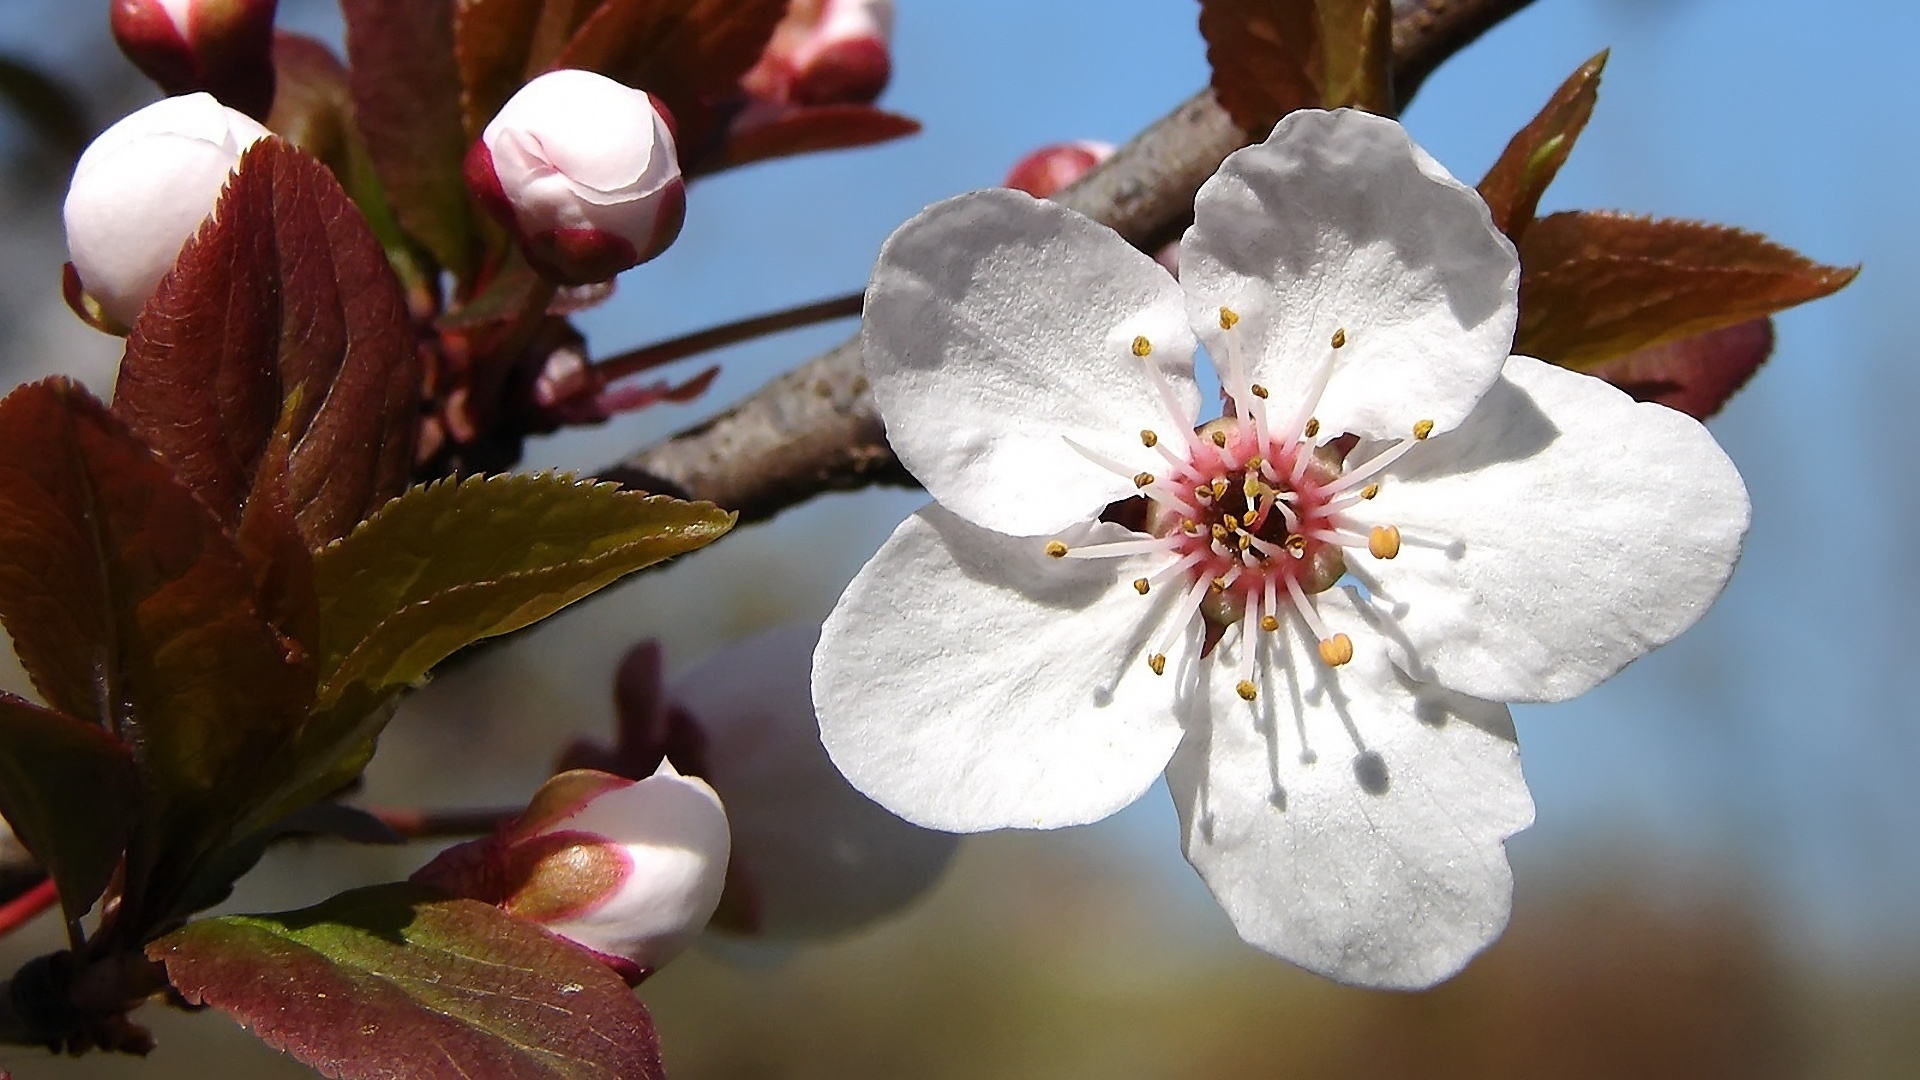 Plum tree blossoms for 1920 x 1080 HDTV 1080p resolution